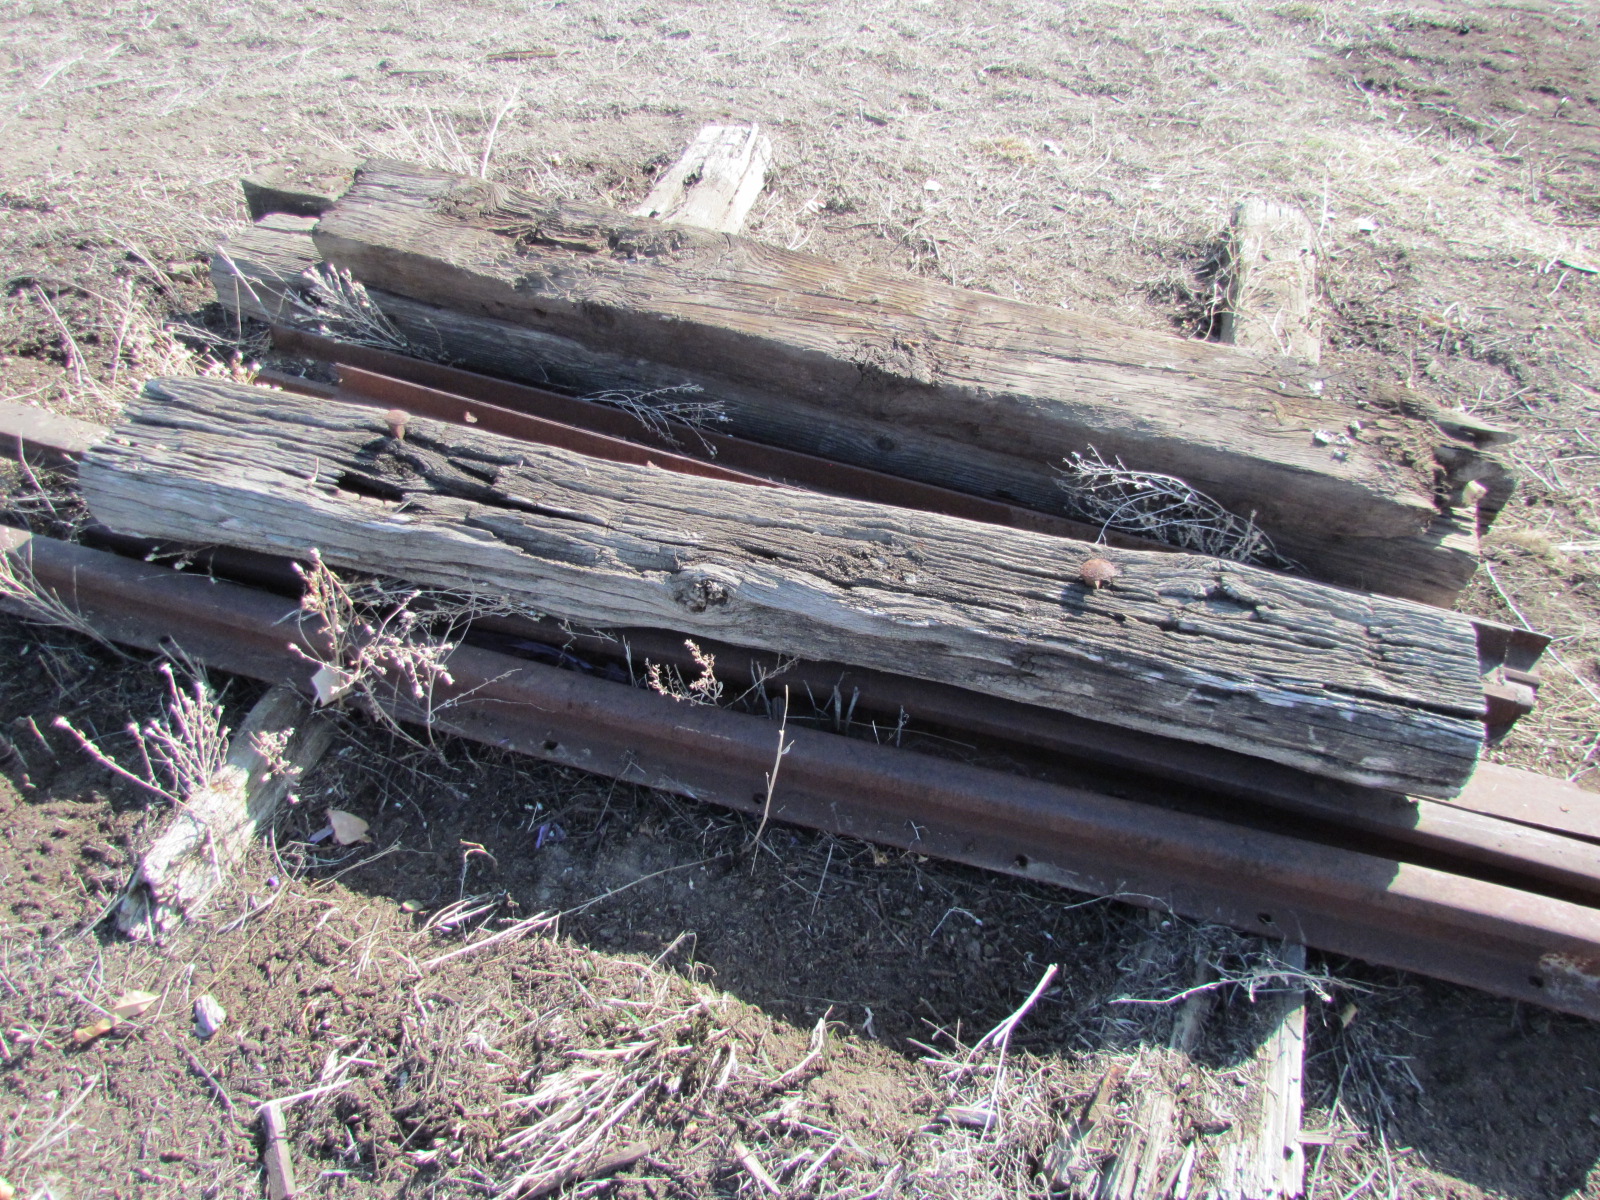 Image of some railroad ties involved in this mystery